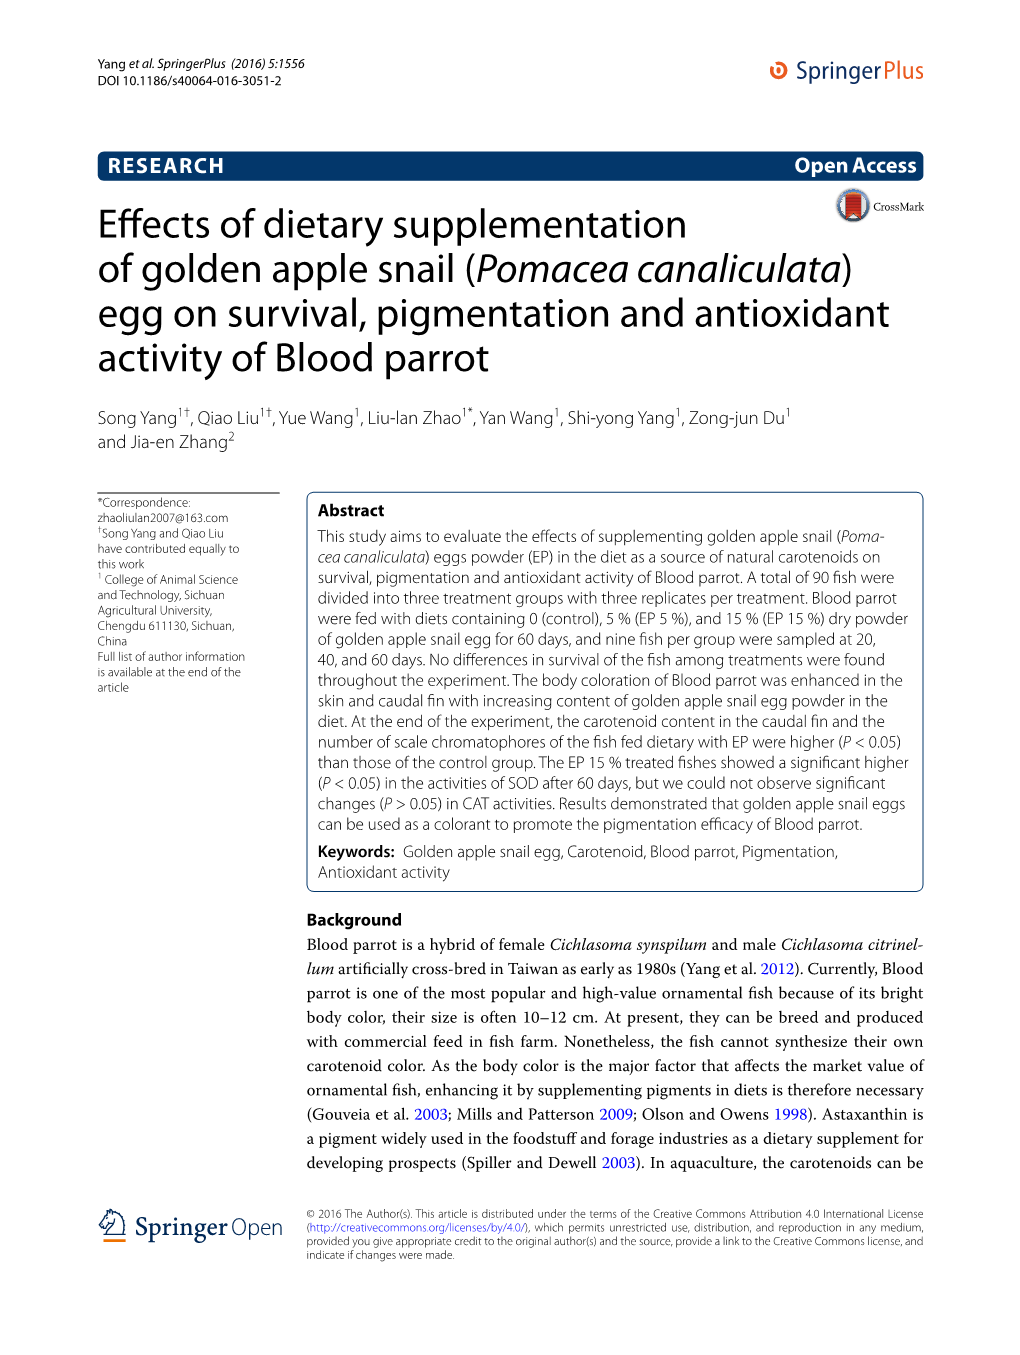 Effects of Dietary Supplementation of Golden Apple Snail (Pomacea Canaliculata) Egg on Survival, Pigmentation and Antioxidant Activity of Blood Parrot